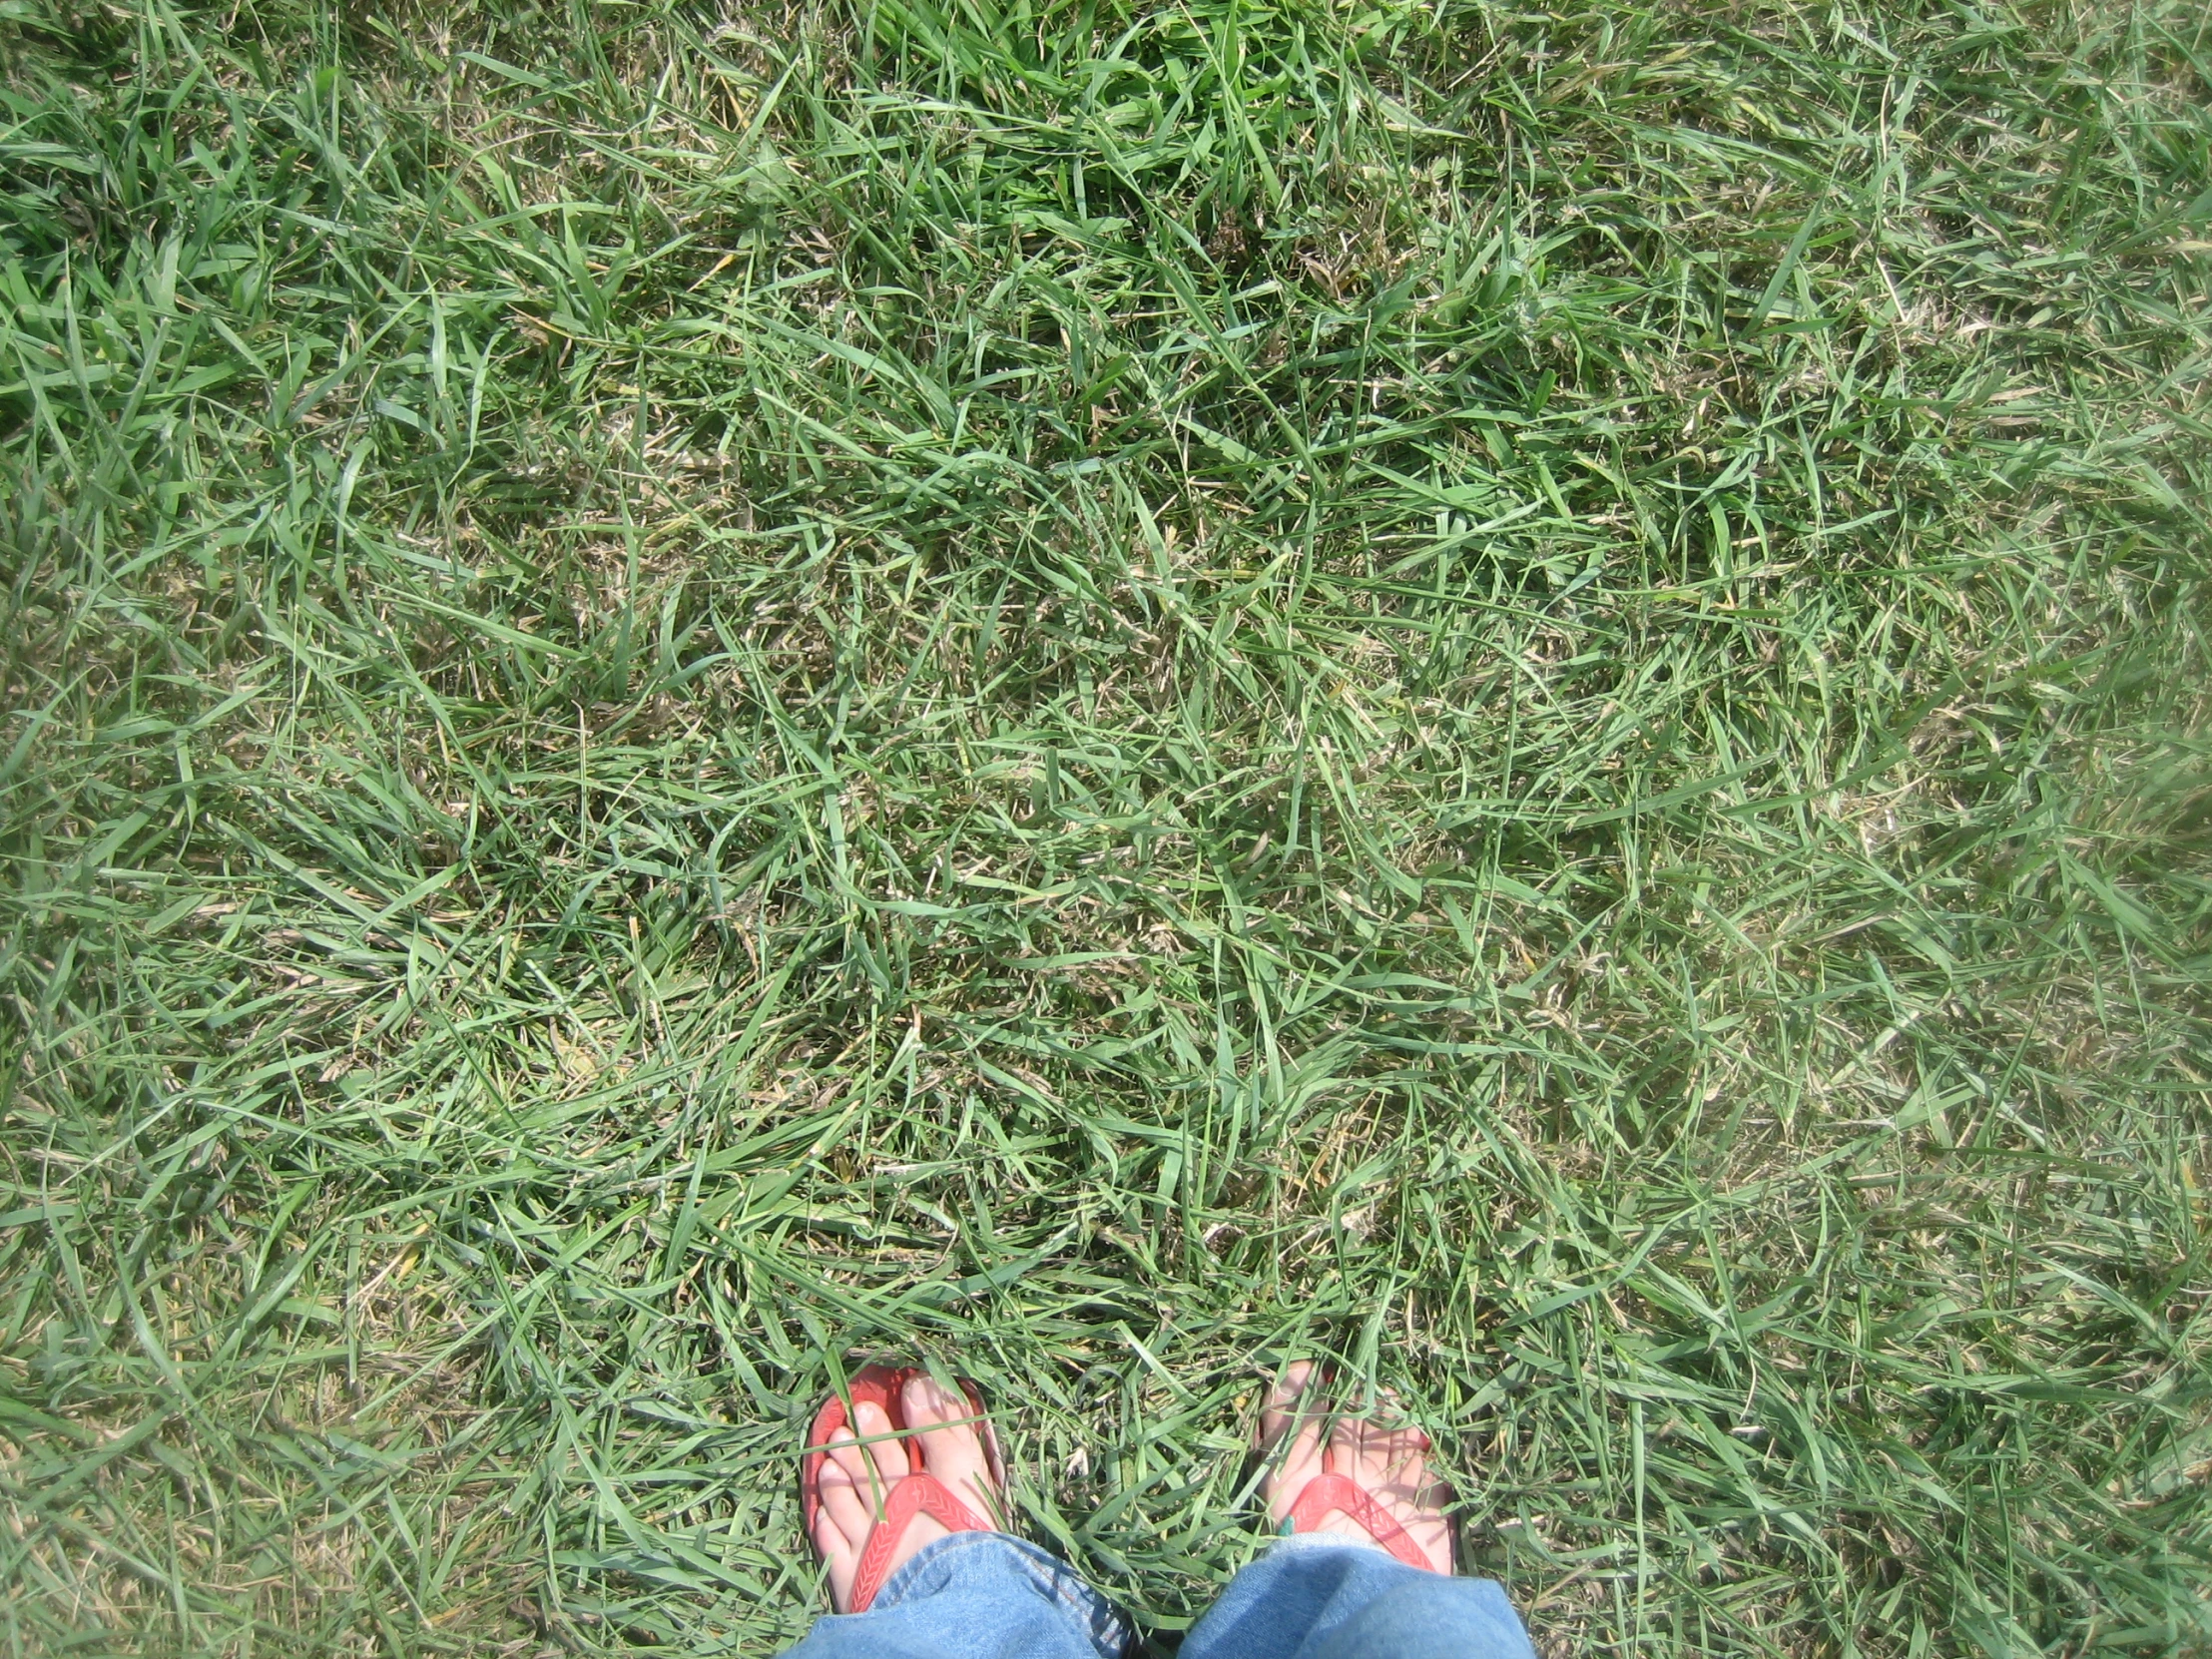 legs in the grass with one person on each side